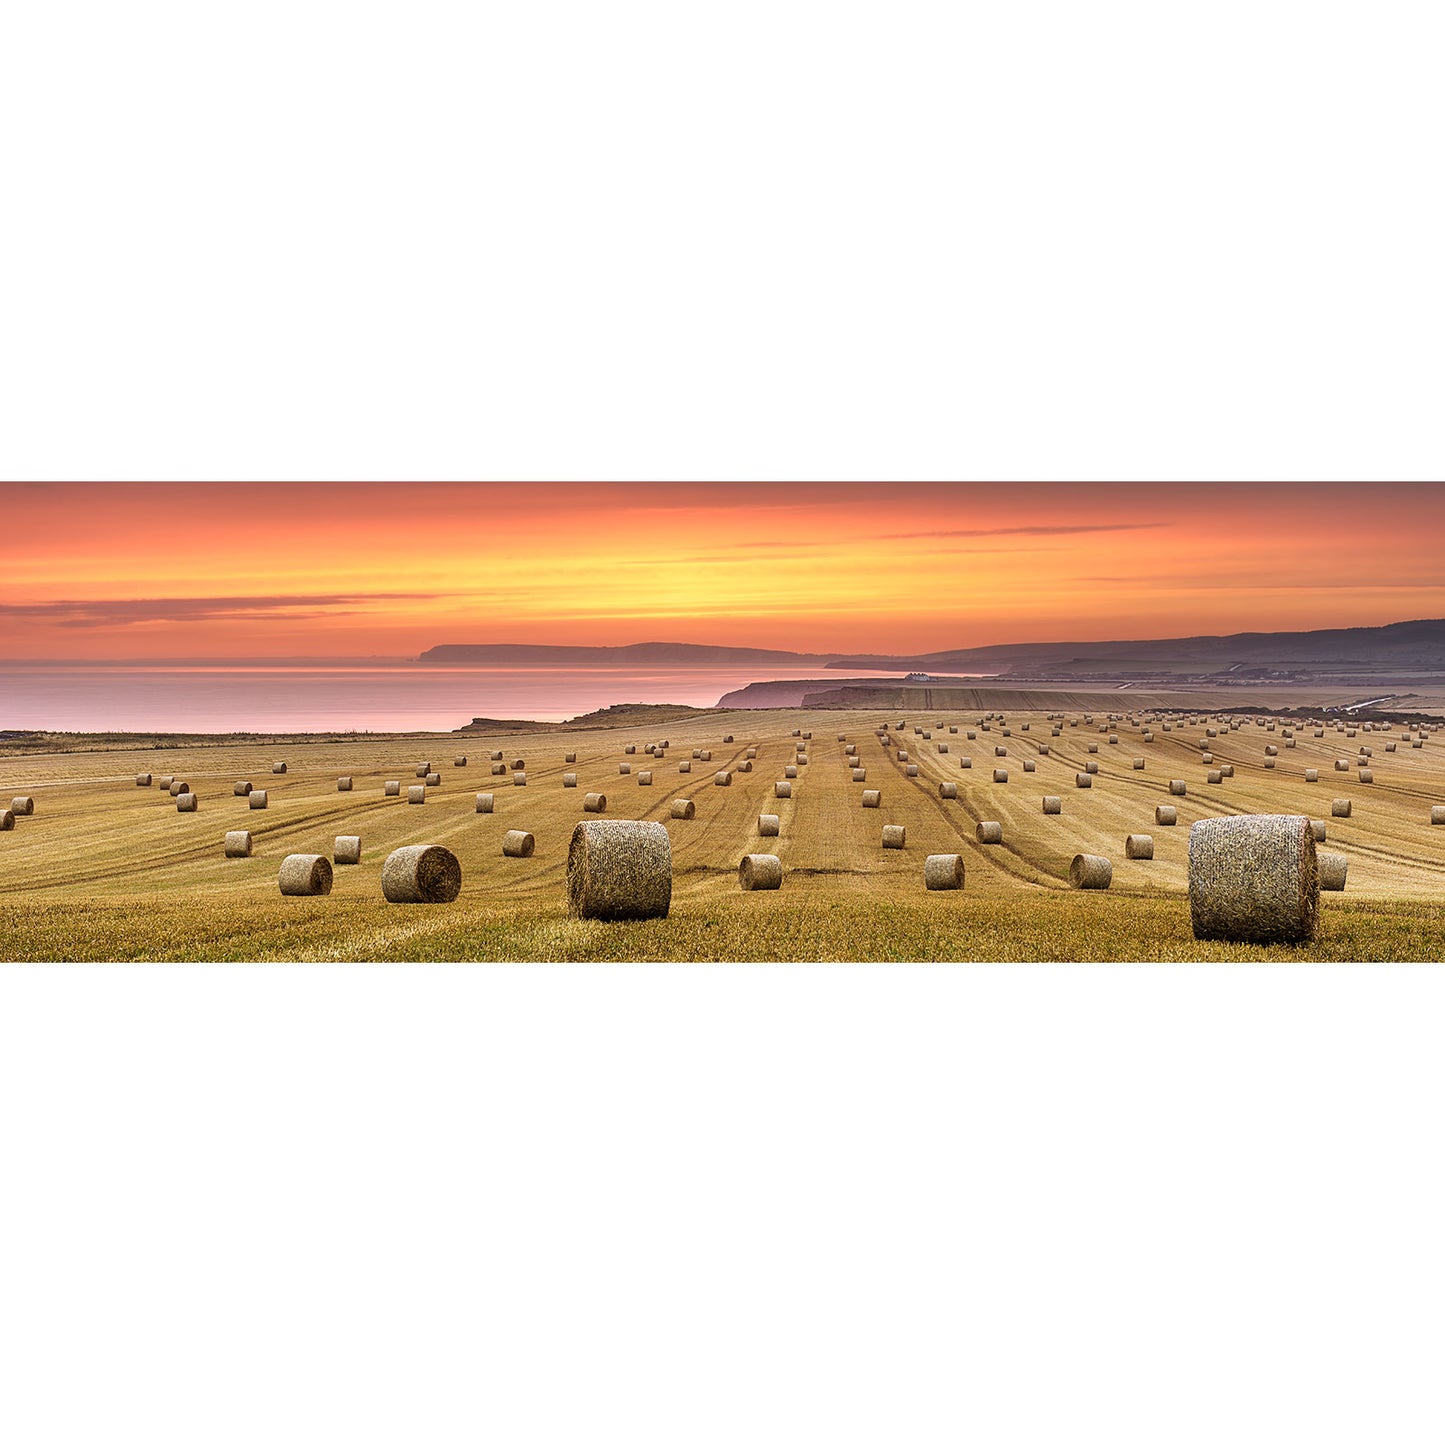 Sunset over a coastal farmland on the Isle, dotted with straw bales from Chale by Available Light Photography.